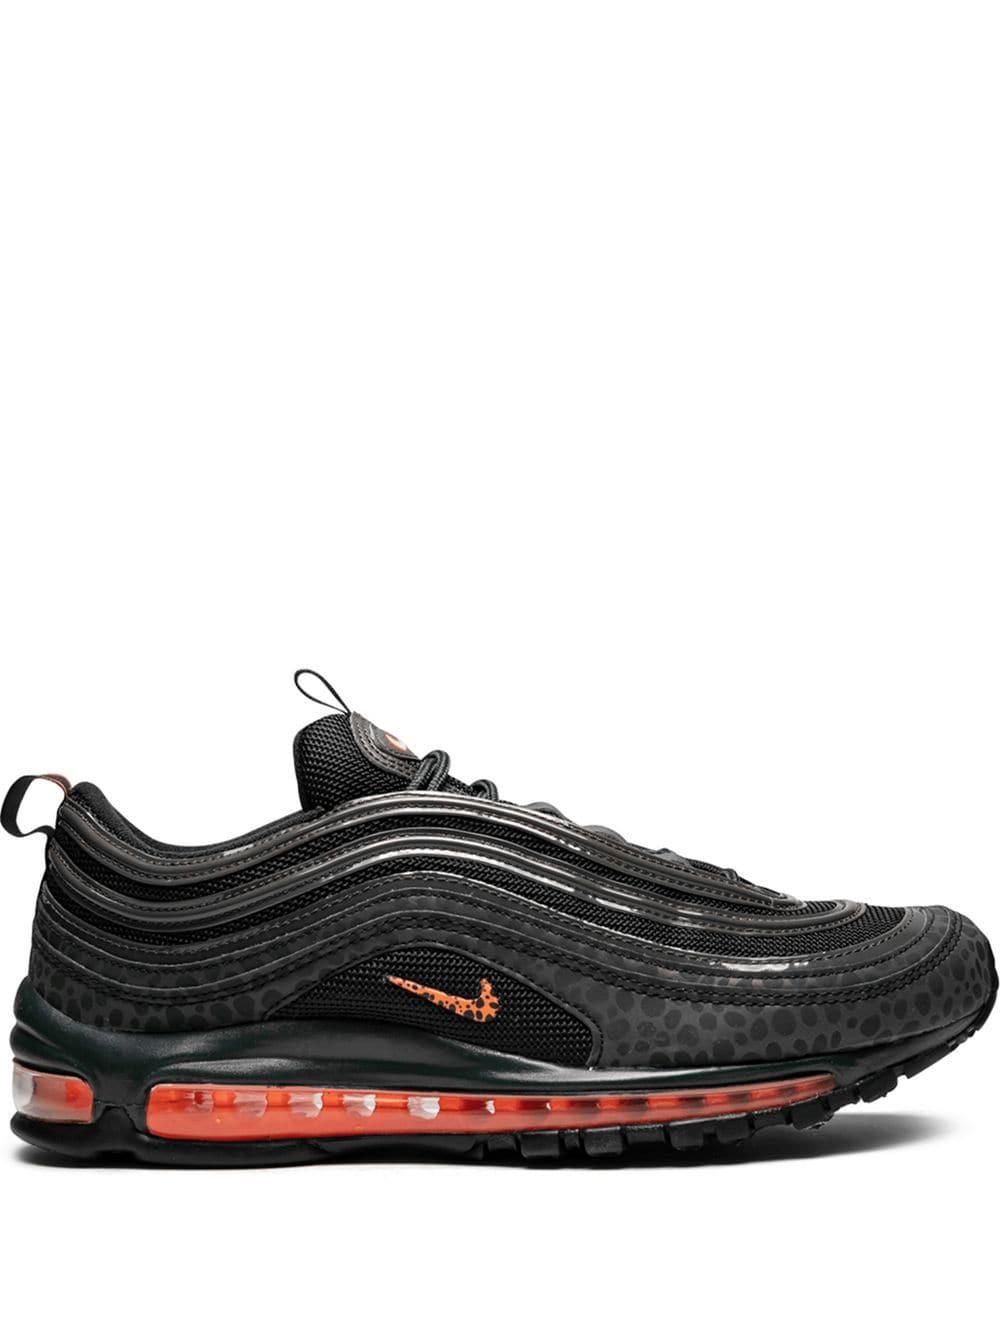 Nike Leather Air Max 97 Se Reflective Sneakers in Black for Men - Lyst